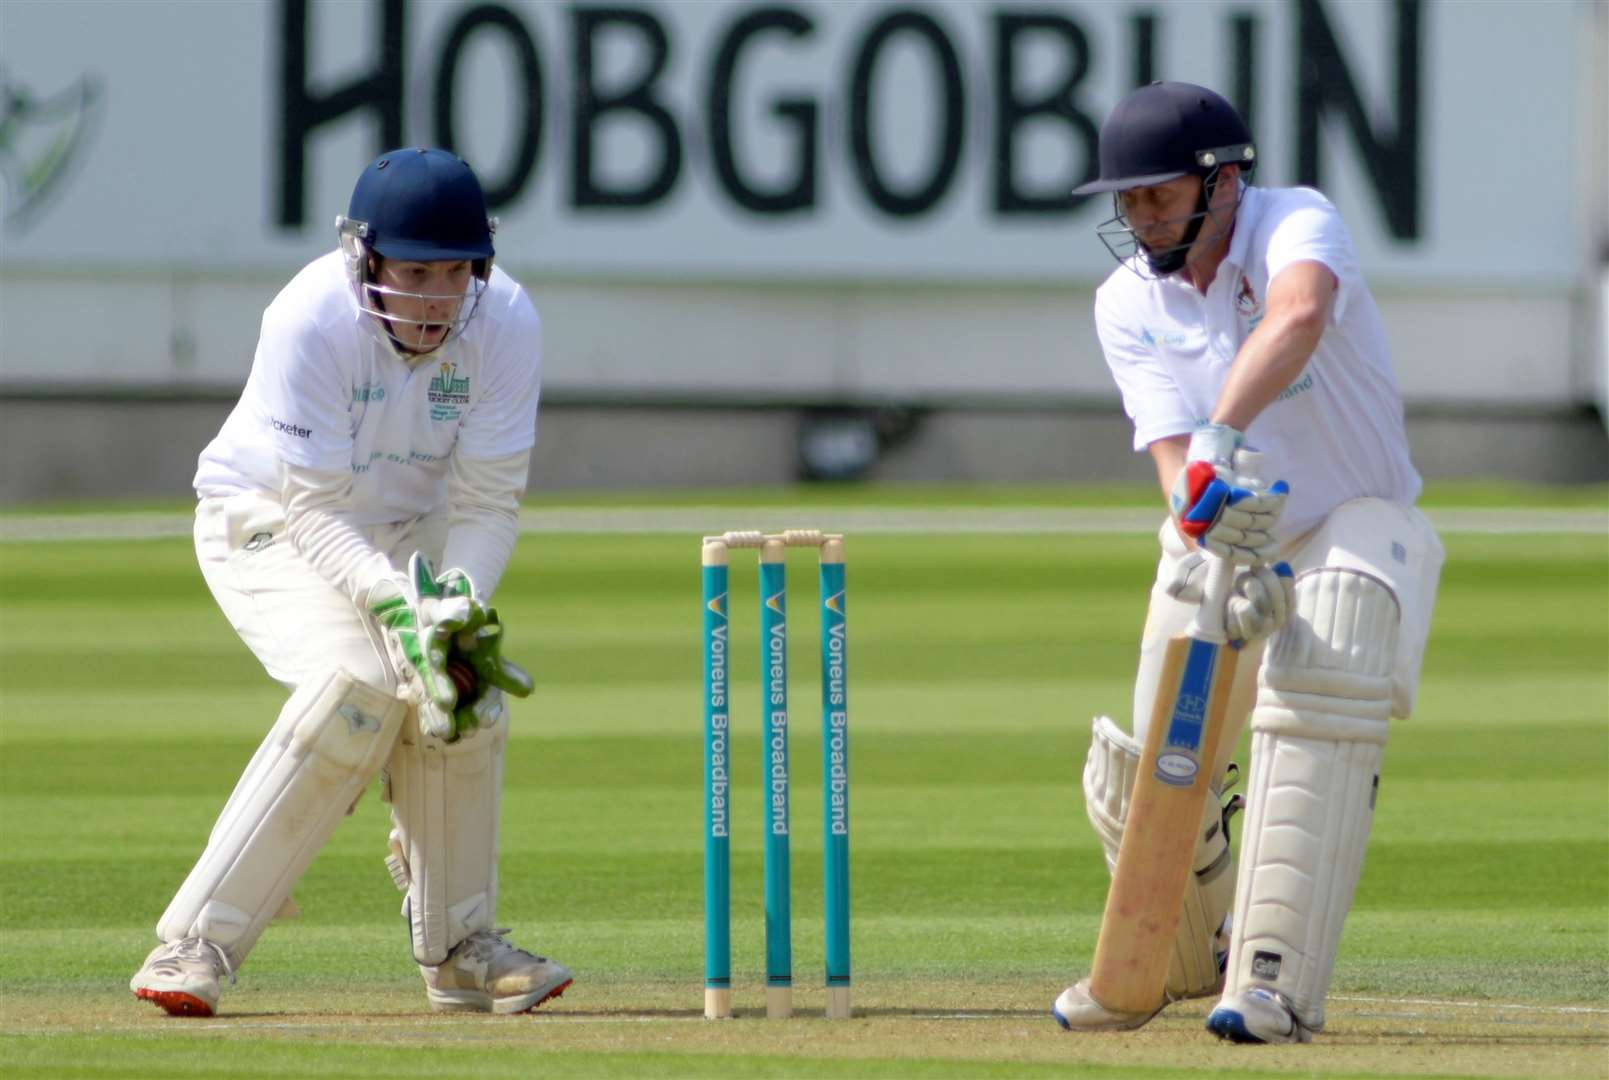 Leeds & Broomfield wicketkeeper Chris Davis takes the ball behind the stumps. Picture: Barry Goodwin